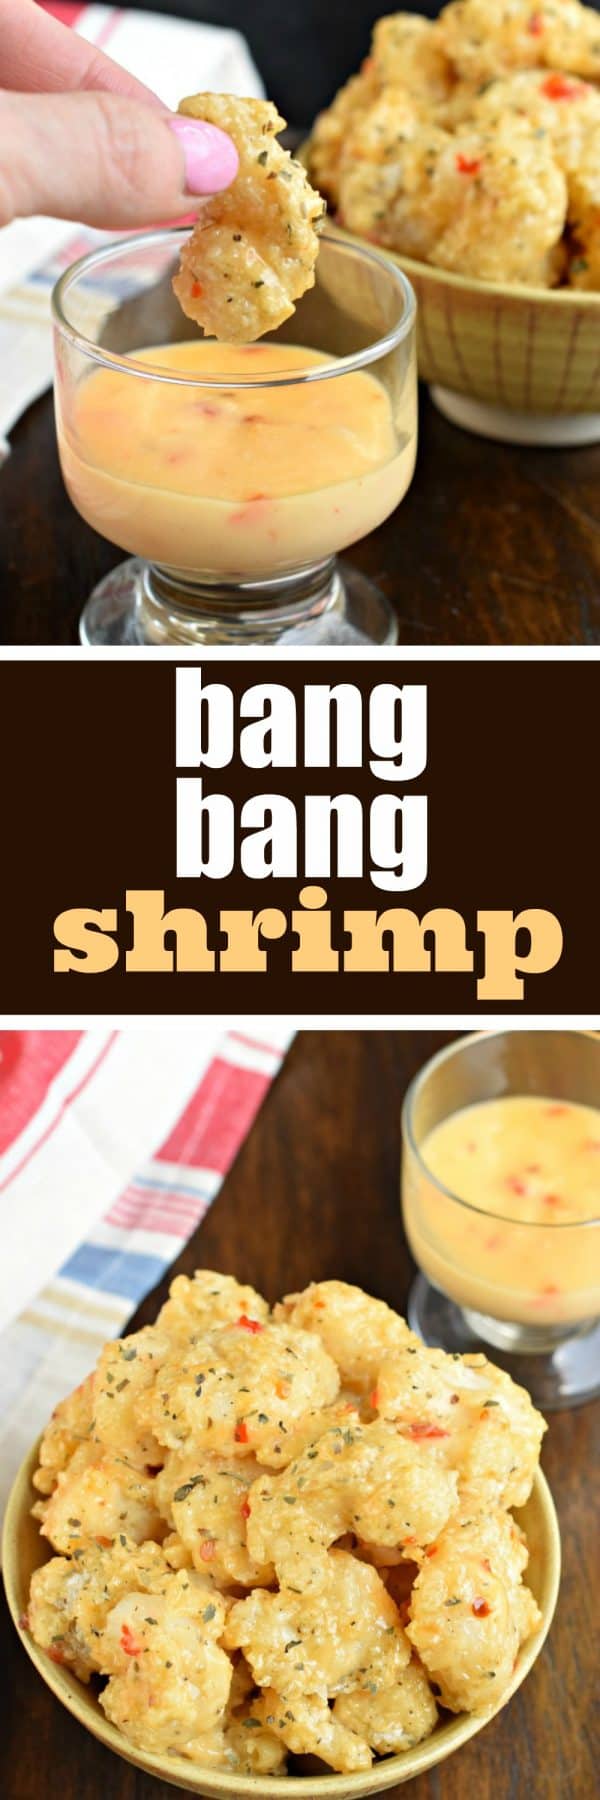 Baked, not fried, Bang Bang Shrimp is a quick and easy weeknight dinner idea with a tangy, yet sweet sauce! 